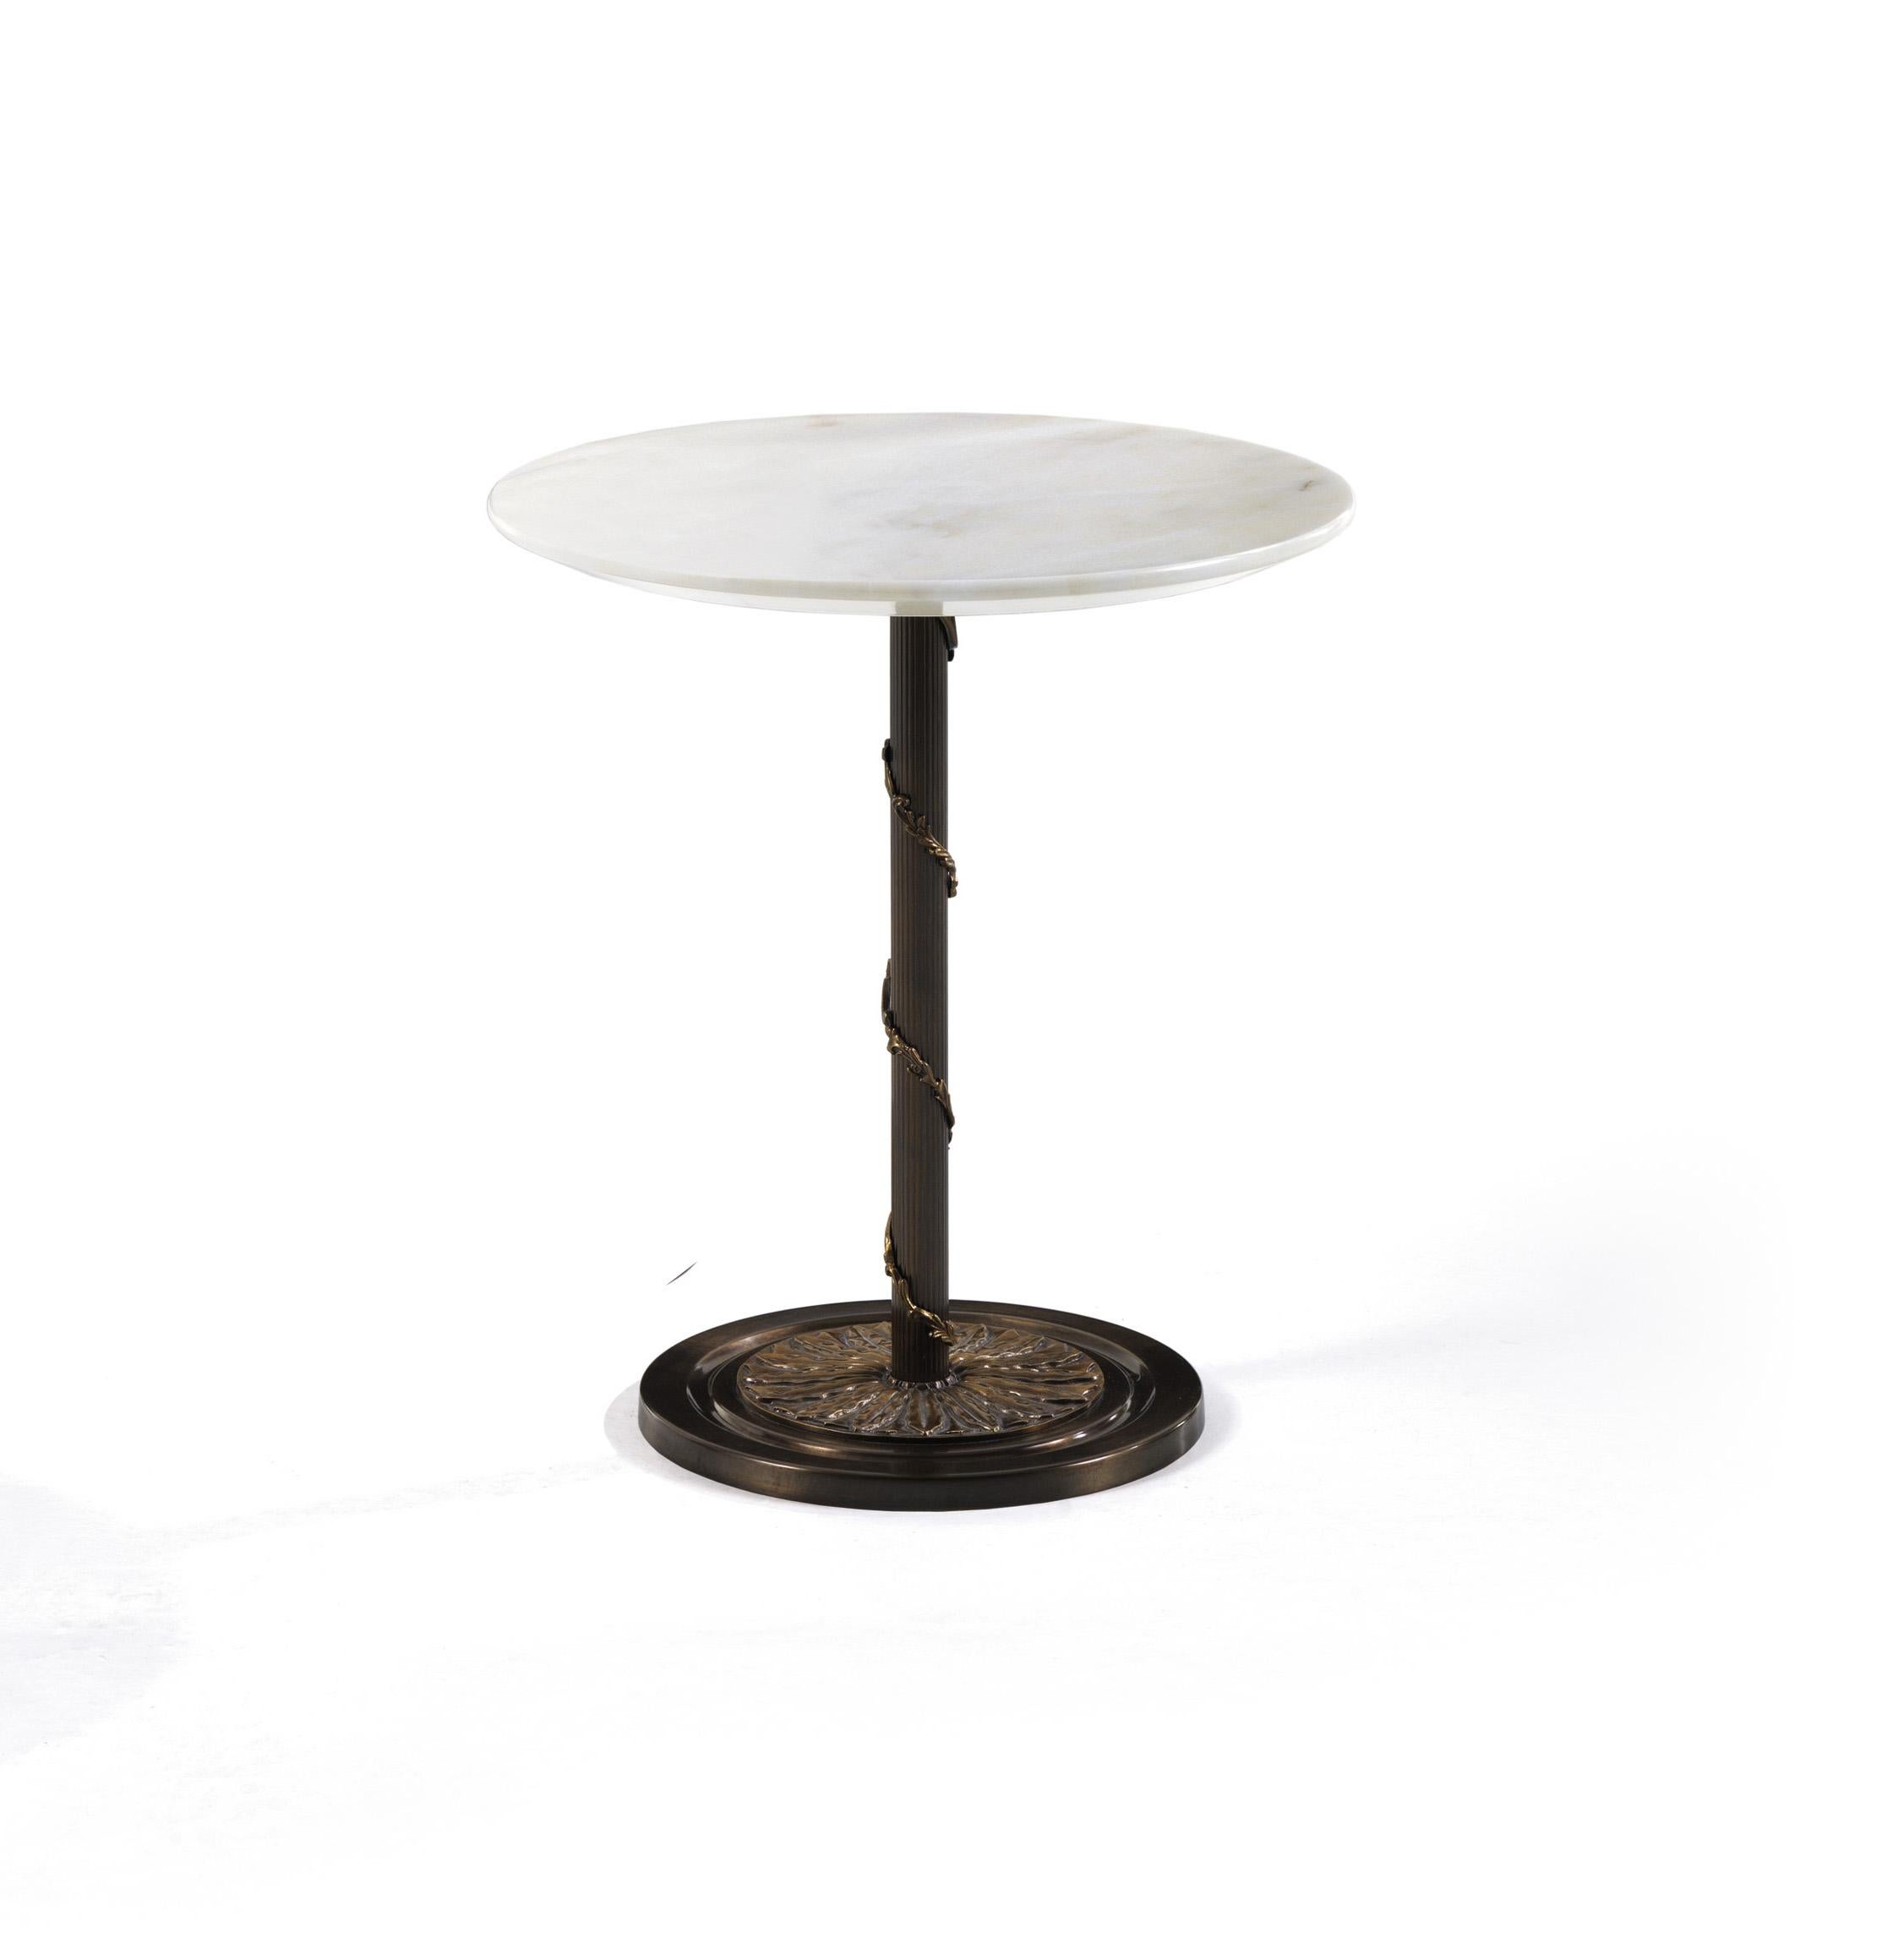 The refined and elegant T107/S small side table, with brass burnished finish base and Estremoz marble top (MR08), is an evergreen of Zanaboni’s collection and it can be matched to any Classic or contemporary designs, for a unique and luxury